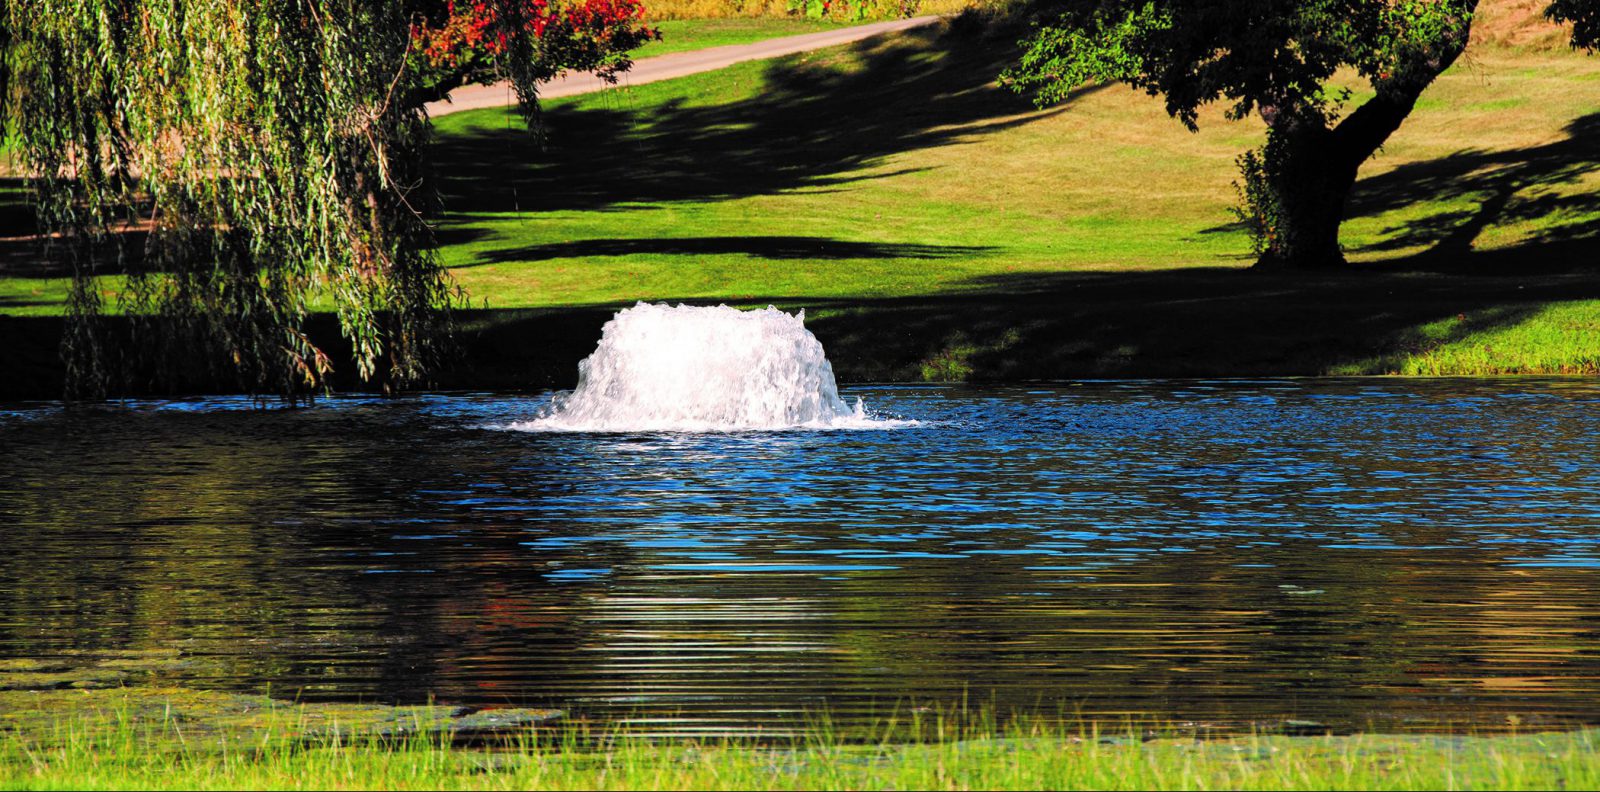 Kasco-Surface-Aerator-2HP- - fountains and aeration services at solitude lake management - vendor partners